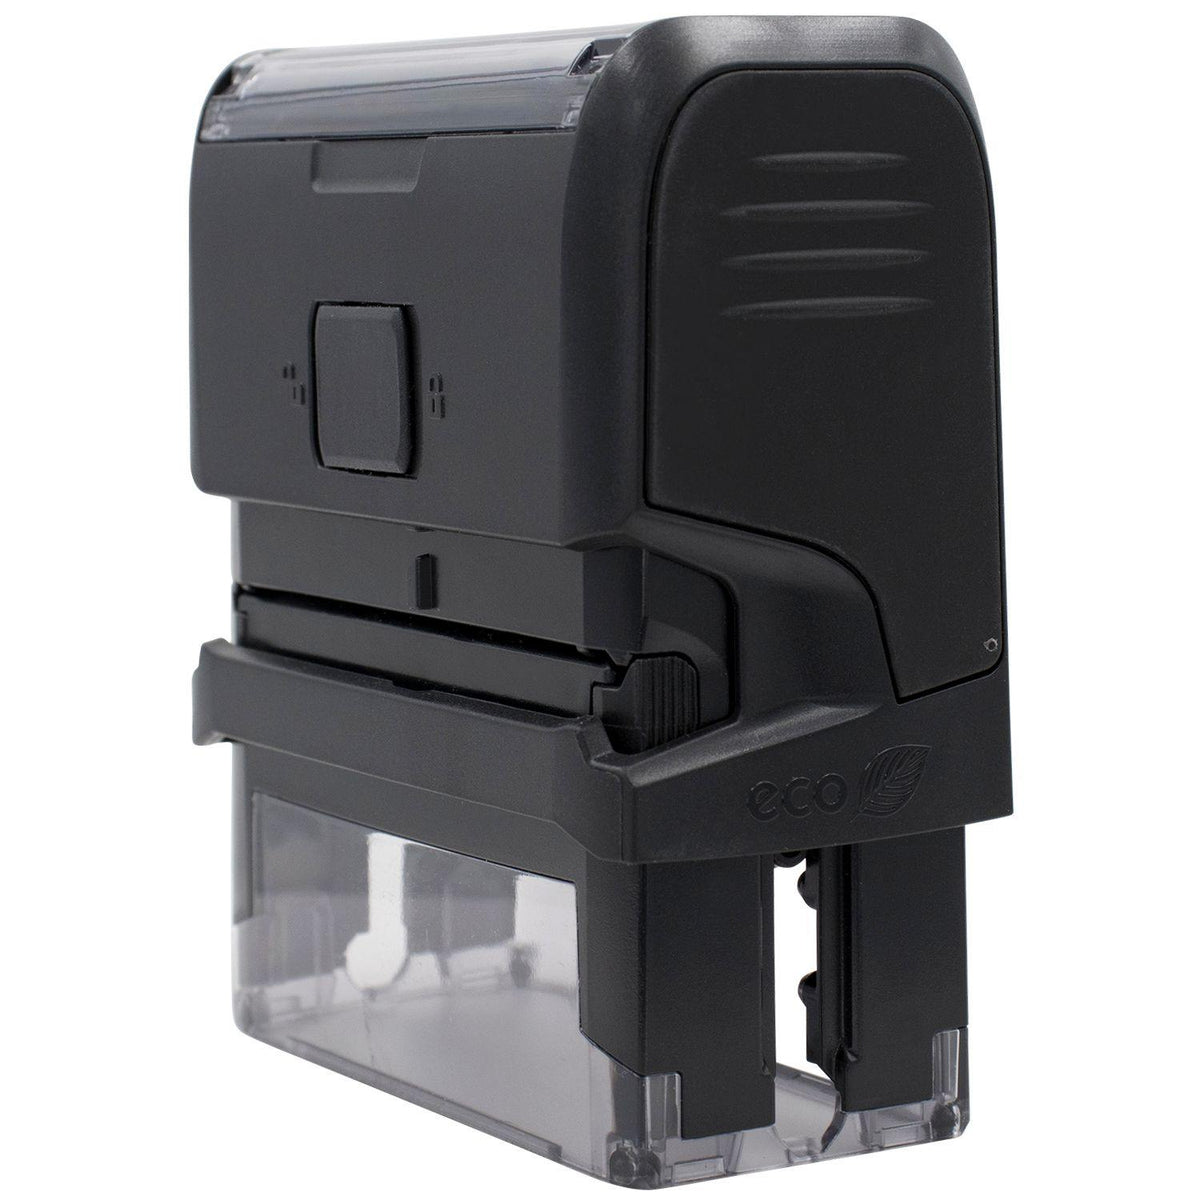 Self-Inking E-Mail Stamp - Engineer Seal Stamps - Brand_Trodat, Impression Size_Small, Stamp Type_Self-Inking Stamp, Type of Use_General, Type of Use_Office